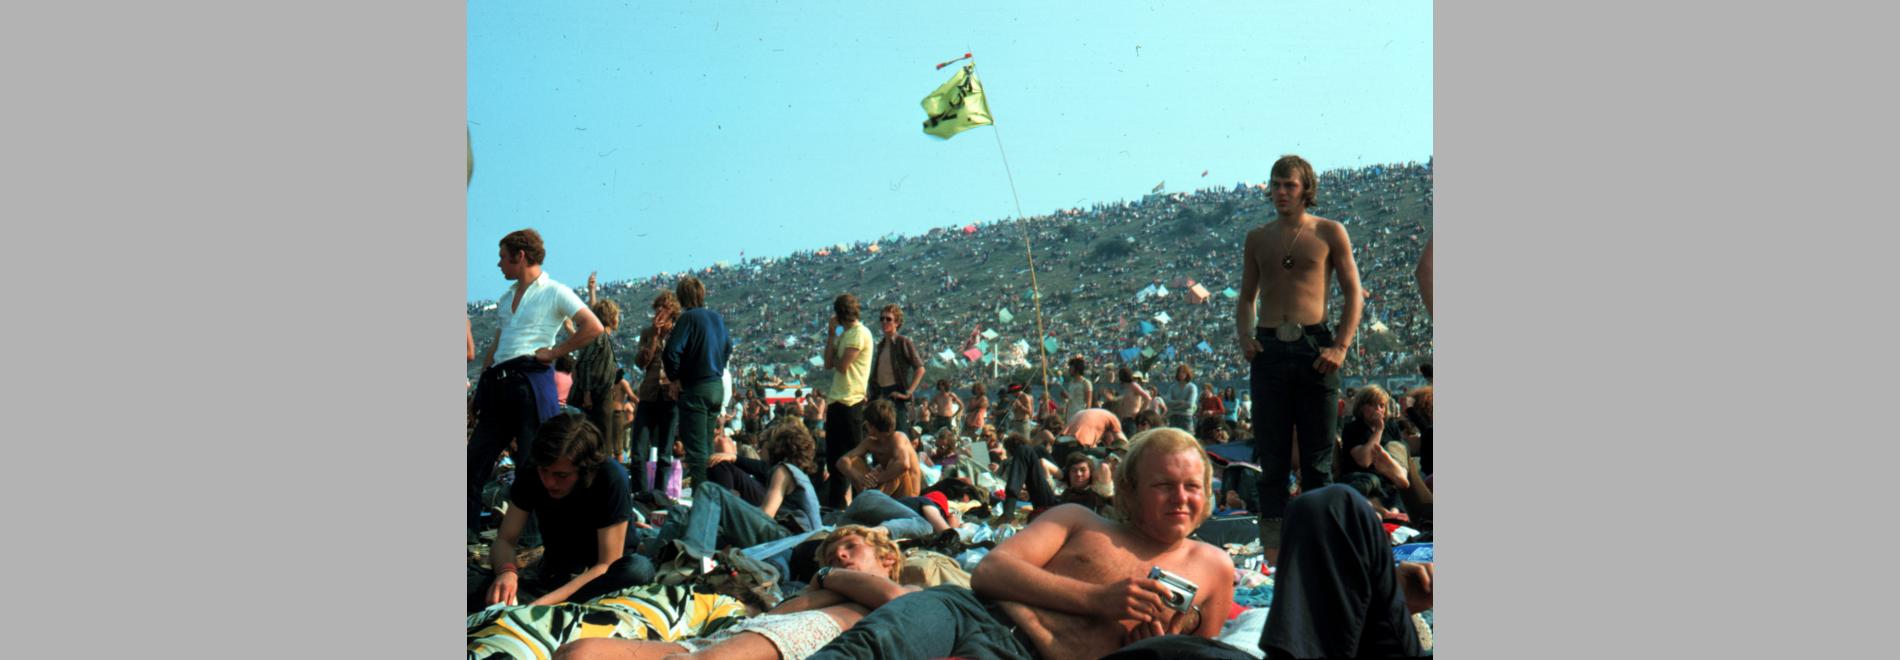 Woodstock - The Director's Cut (Michael Wadleigh, 1970)